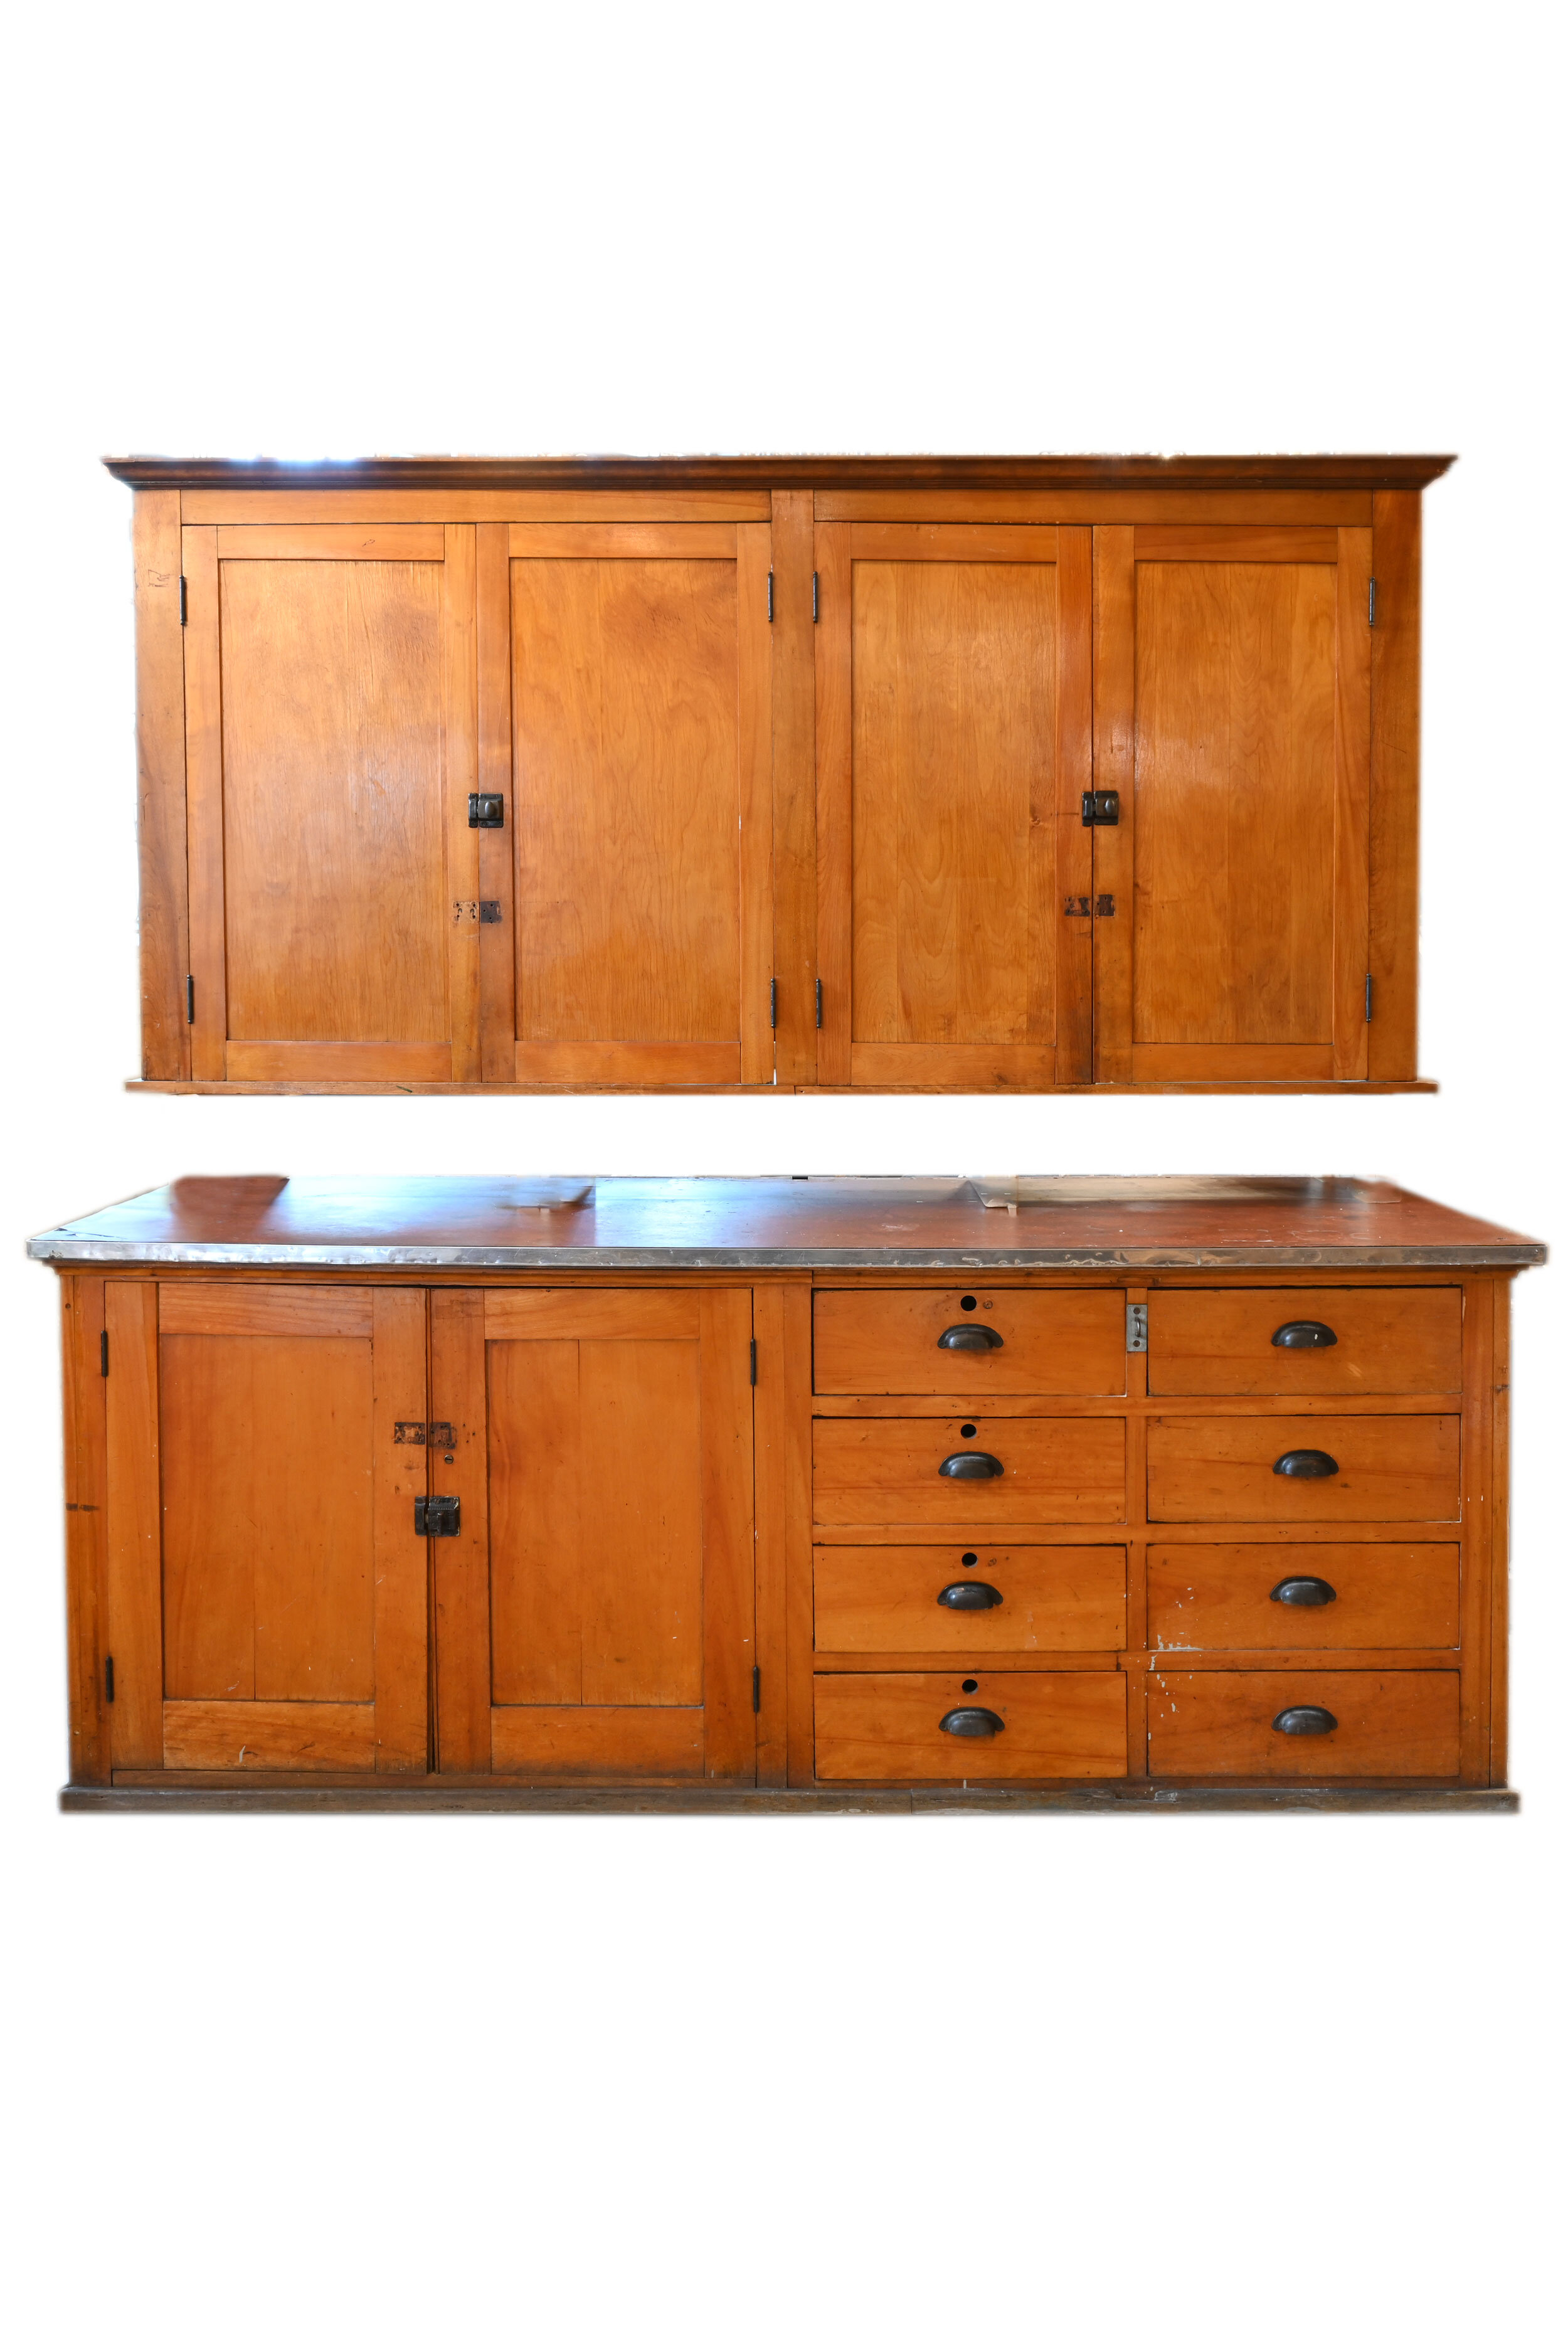 maple-cabinet-unit-with-nickel-hardware-architectural-antiques